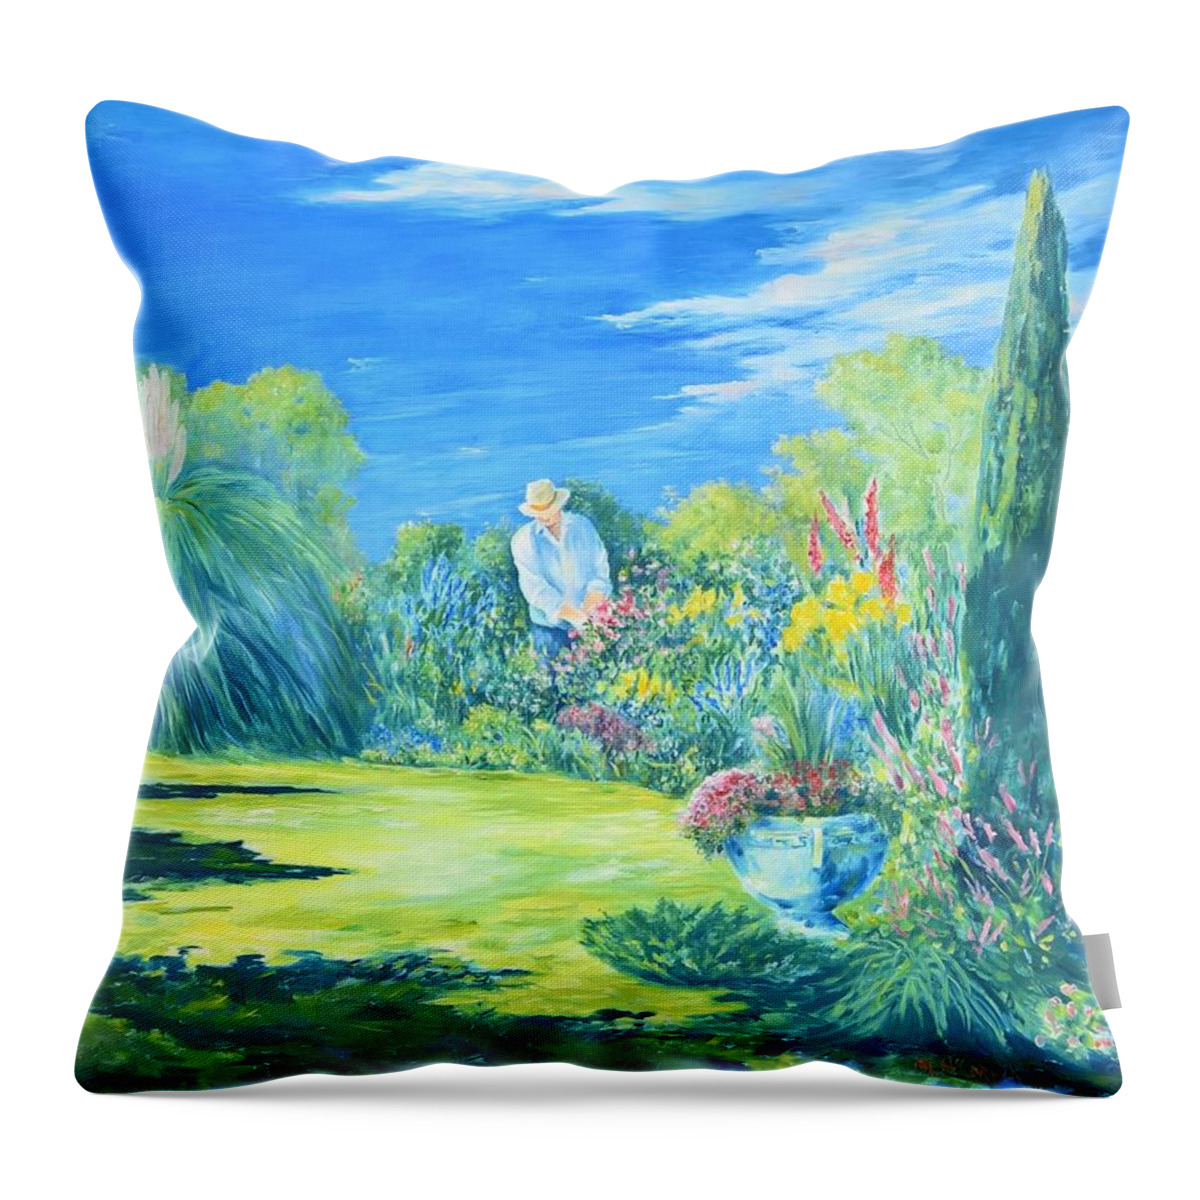 Morning Throw Pillow featuring the painting The Gardener by ML McCormick